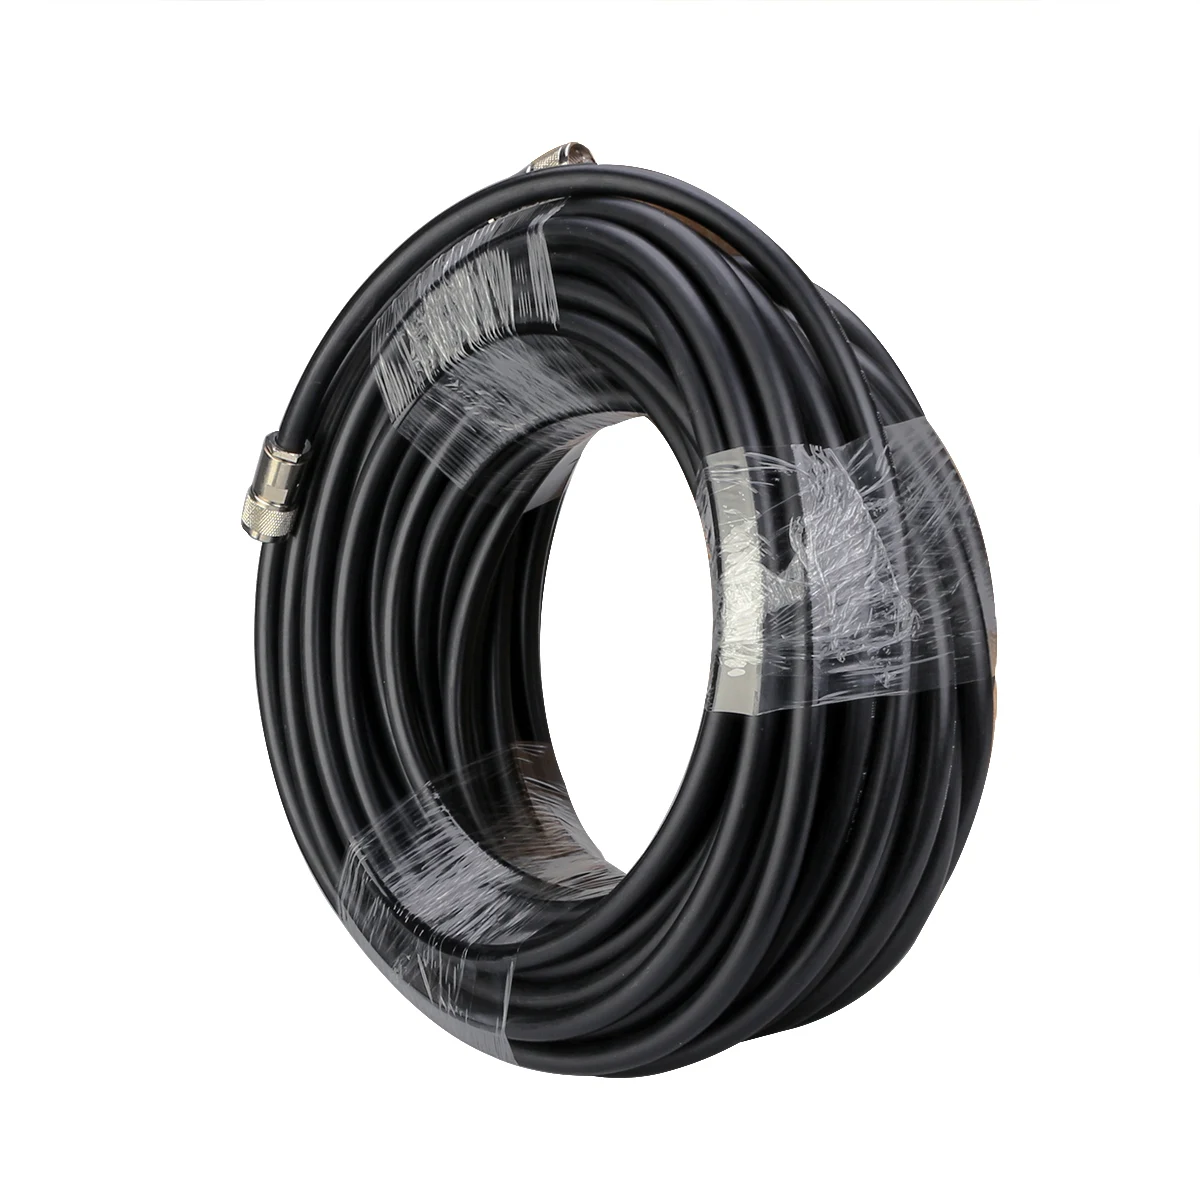 

Retevis 50-7 Pure Cupper Antenna Feeder cable Low Loss Coaxial Extend Cable 25 Meter for Walkie Talkie Repeater